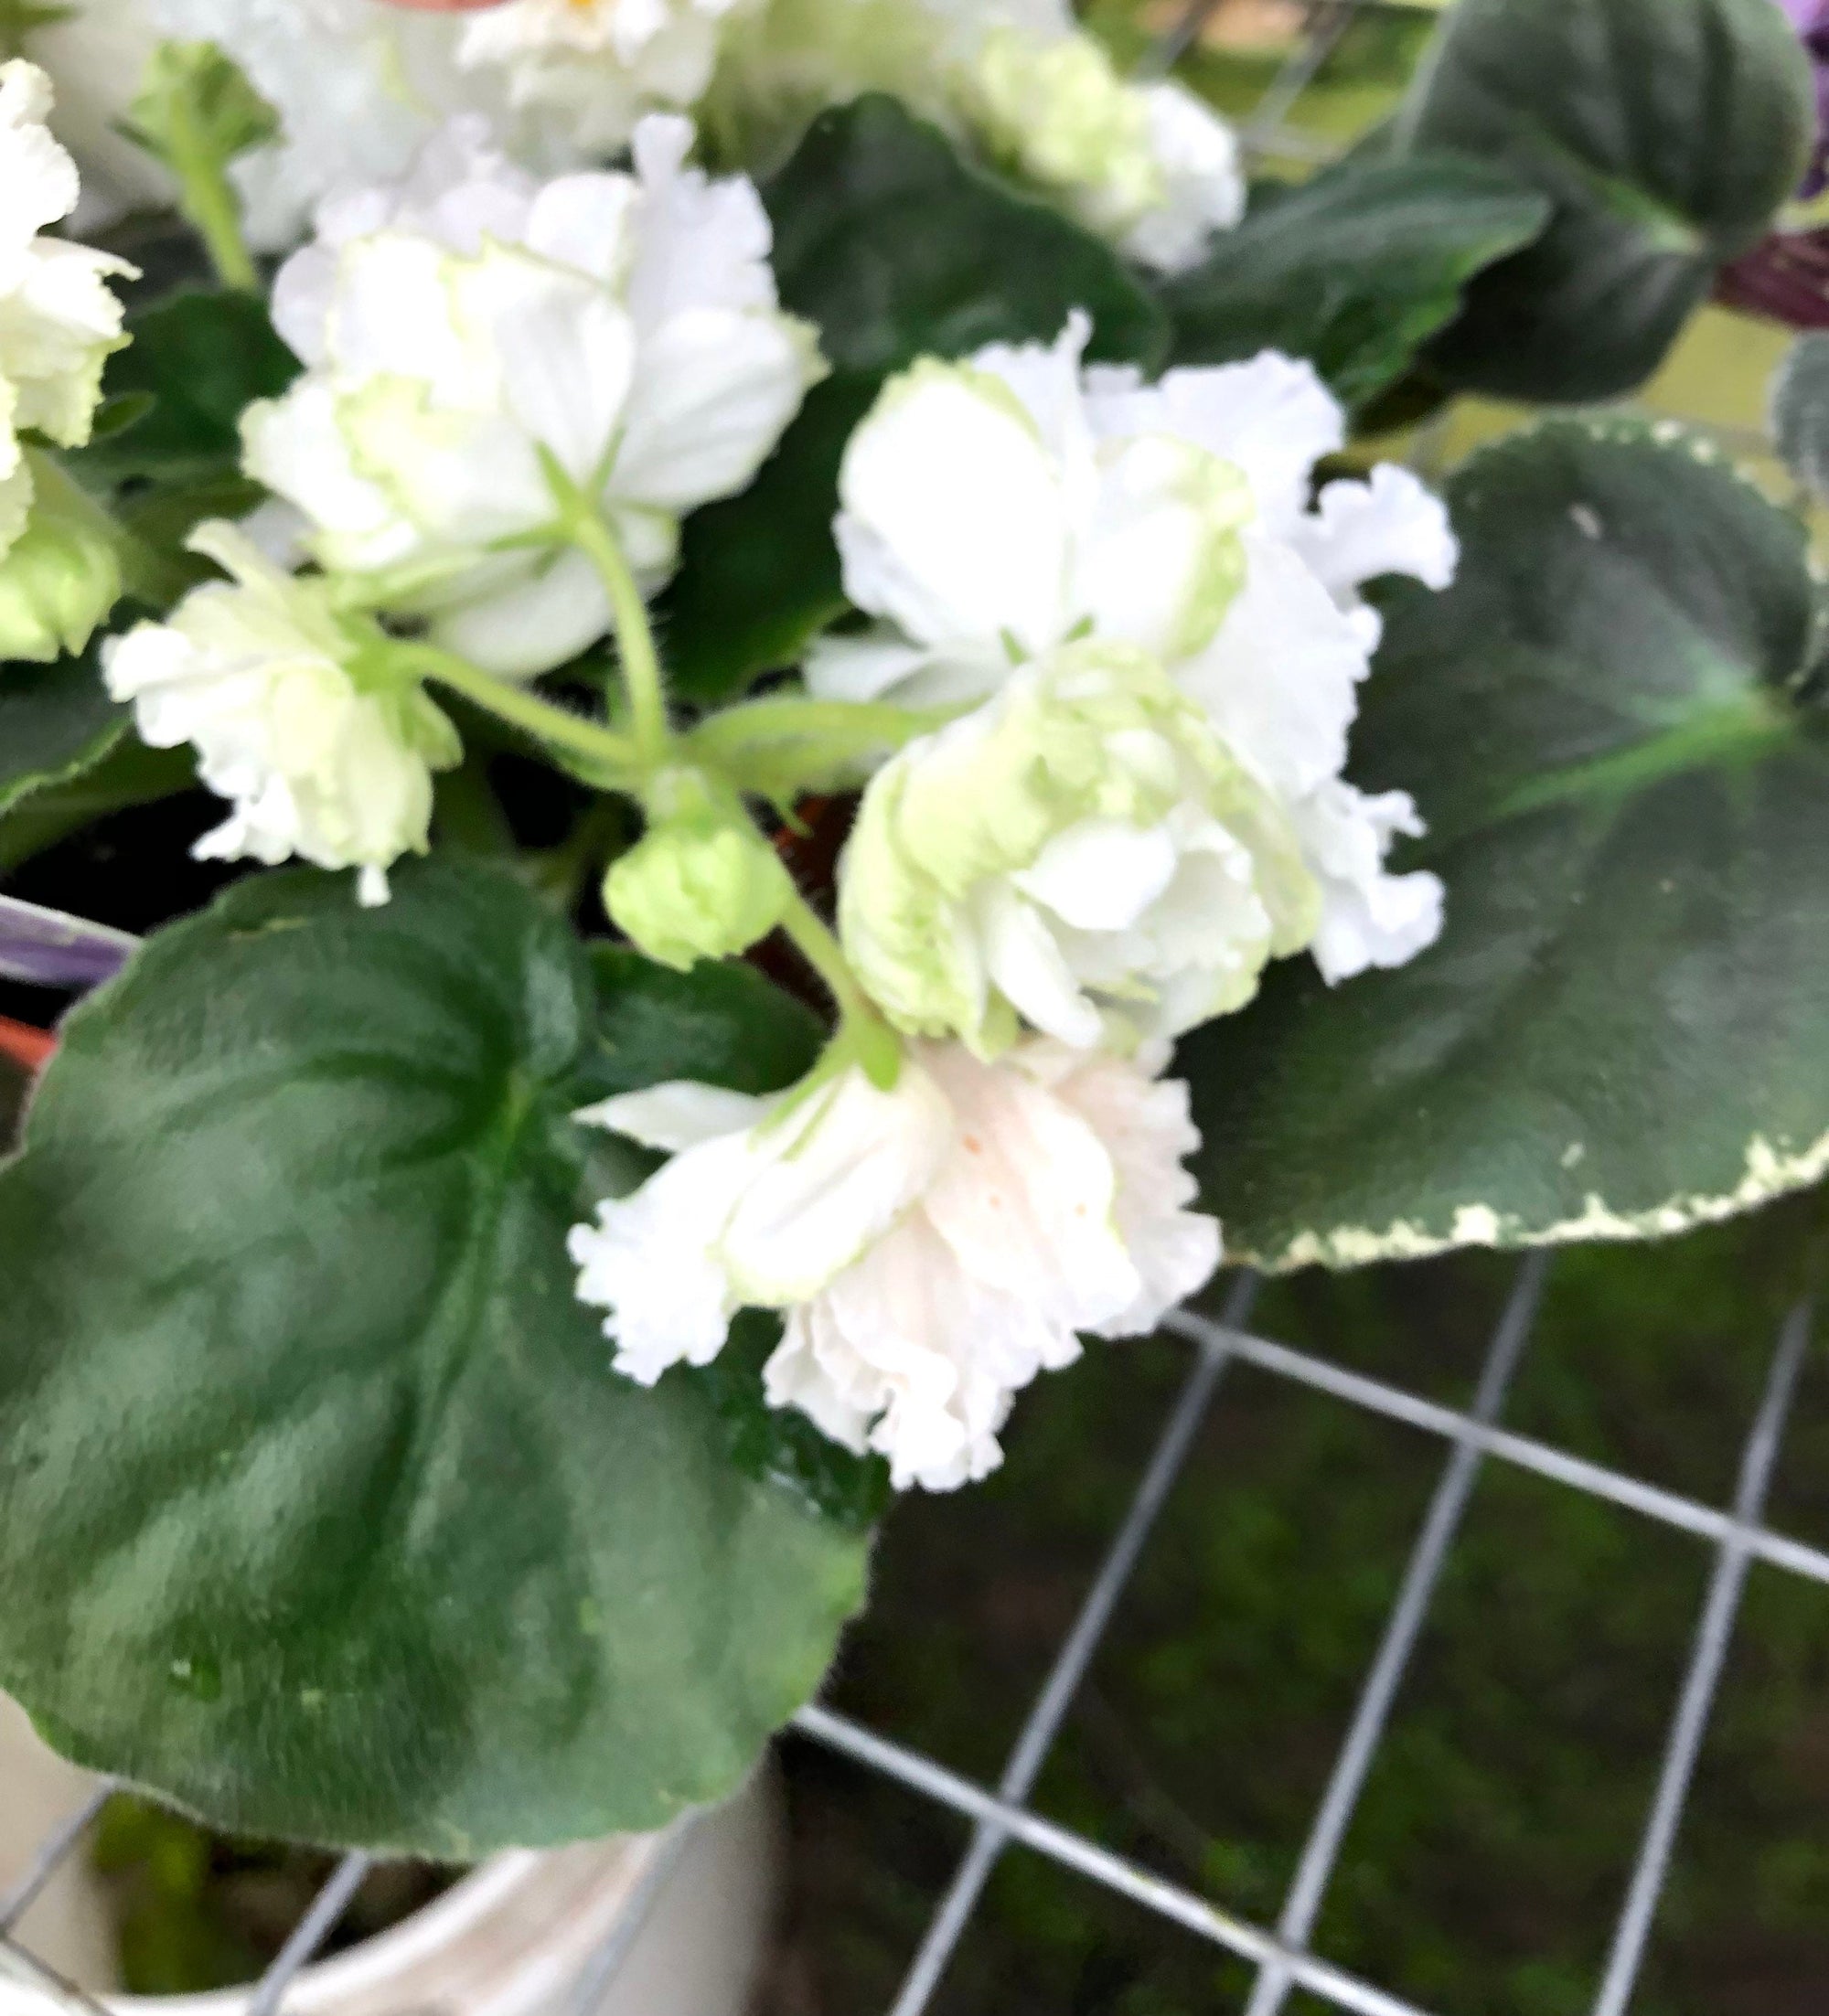 Live house plant African Violet Ruffled white Harmony’s ‘White Queen’ variegated bloom garden 4” flower Potted gift